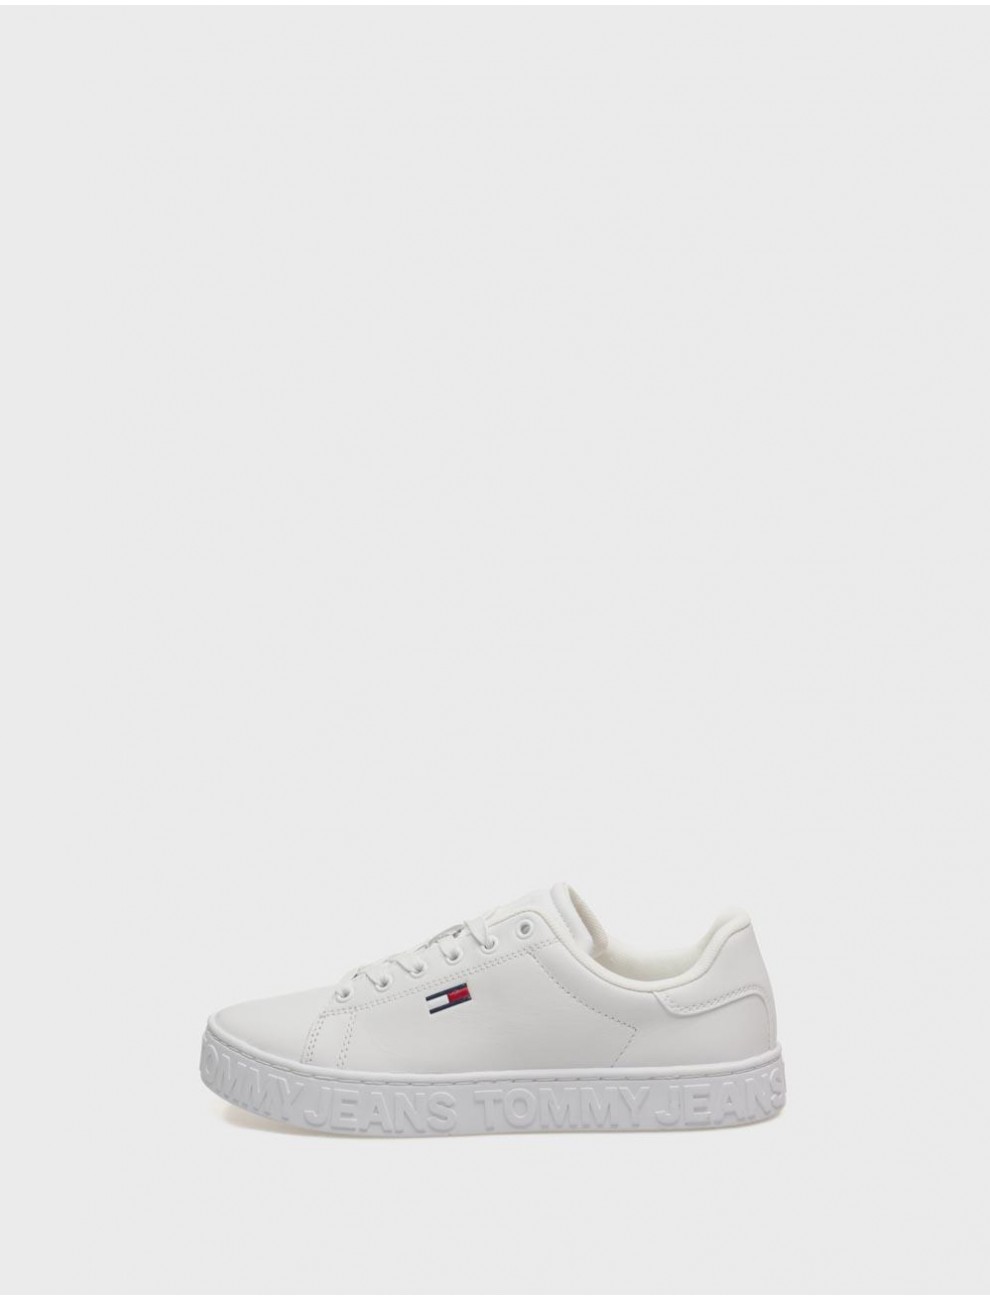 Tommy Cool Tommy Jeans Sneaker Blanco | Kamomeshop.es